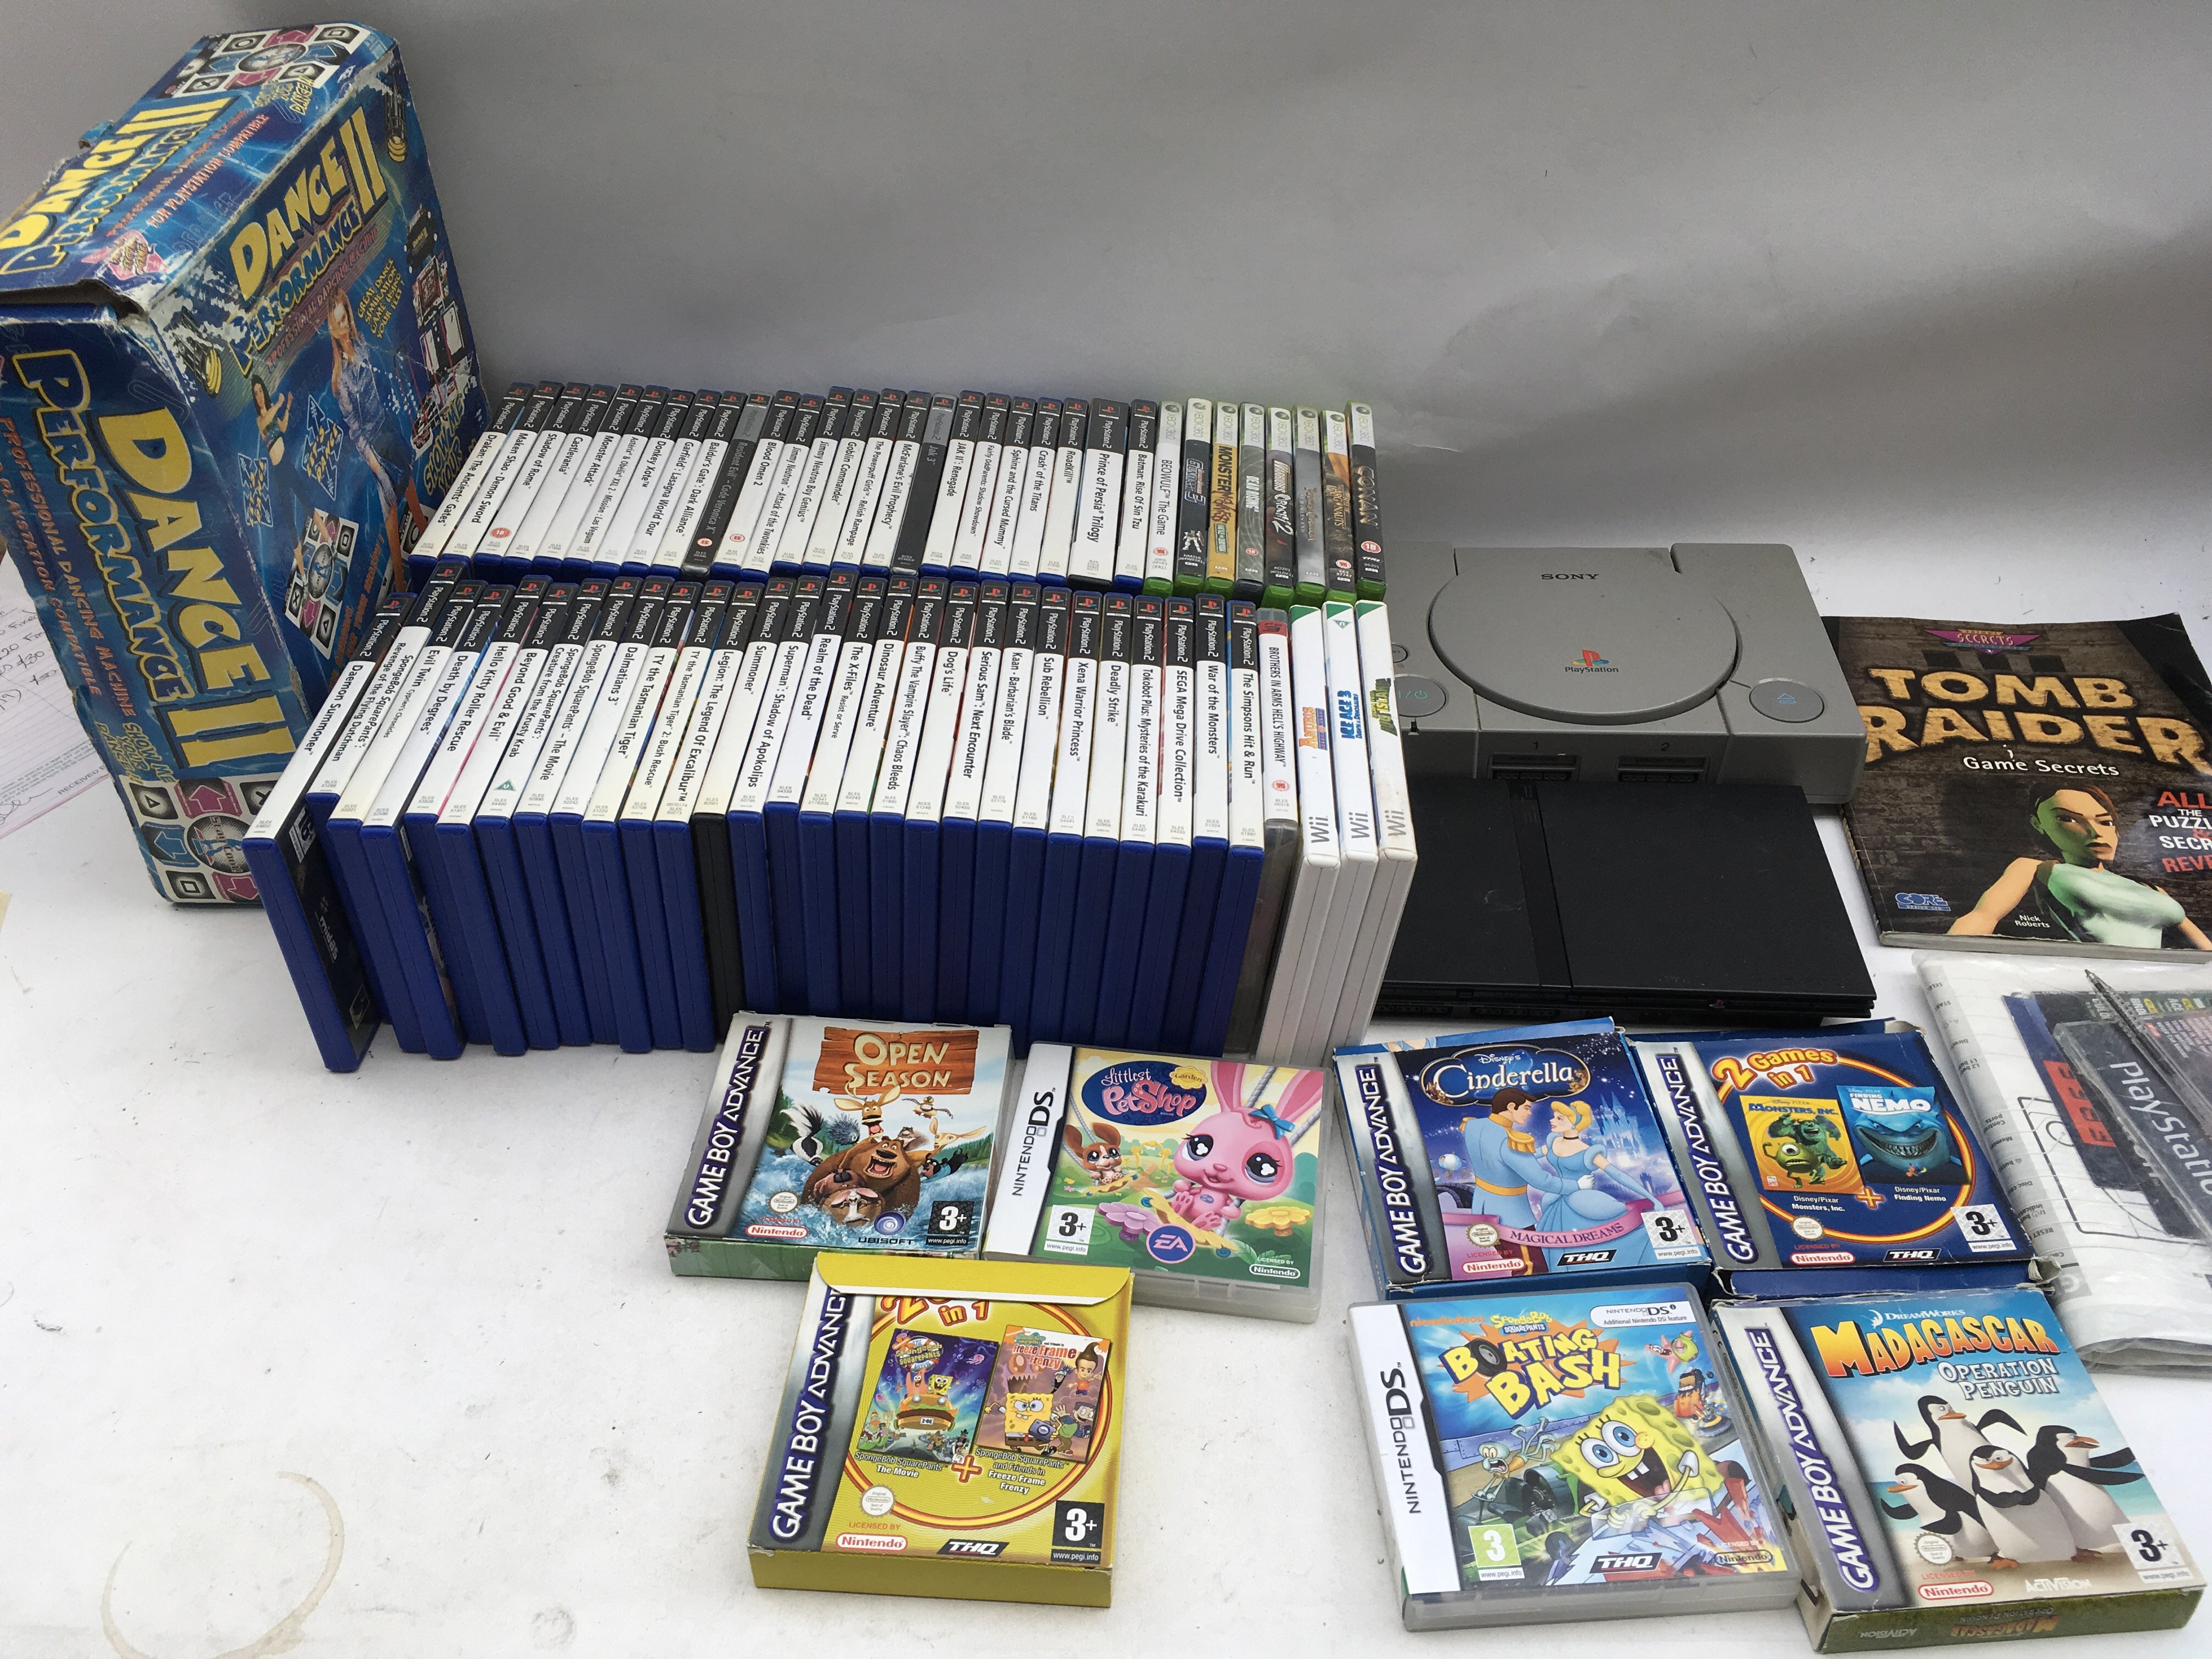 A box of PlayStation, Xbox, Gameboy advance and Ni